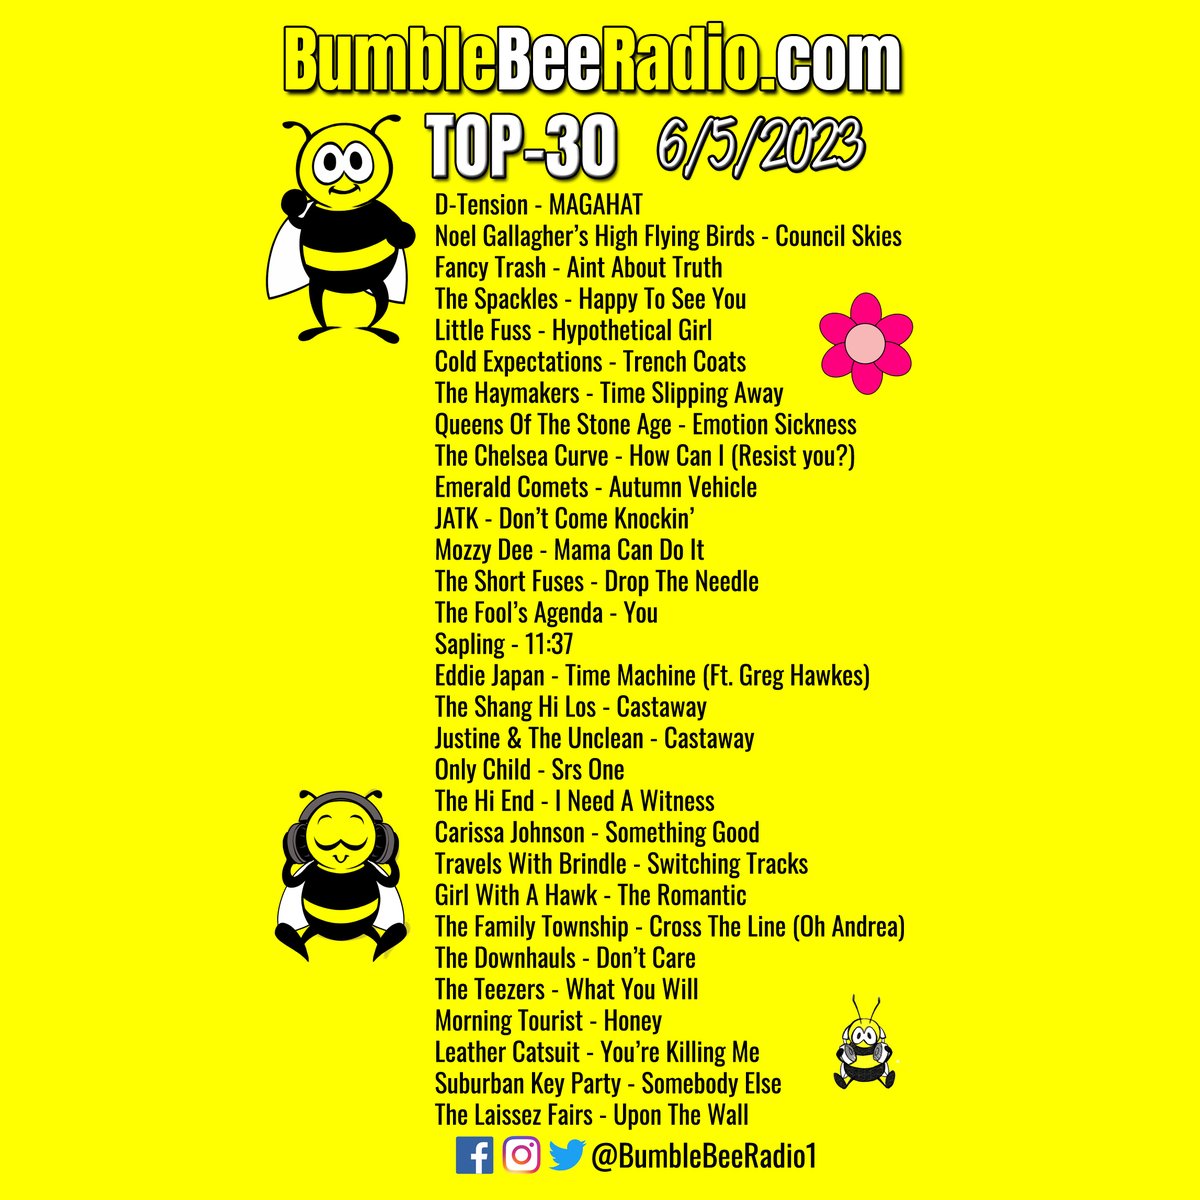 Monday 6/5/23: Here are the Top-30 songs based on airplay last week on BumbleBee Radio. As always thanks for listening! - Kristen Eck 📻🐝🎶🎵 #Indie #Alternative #Boston #InternetRadio #Top30